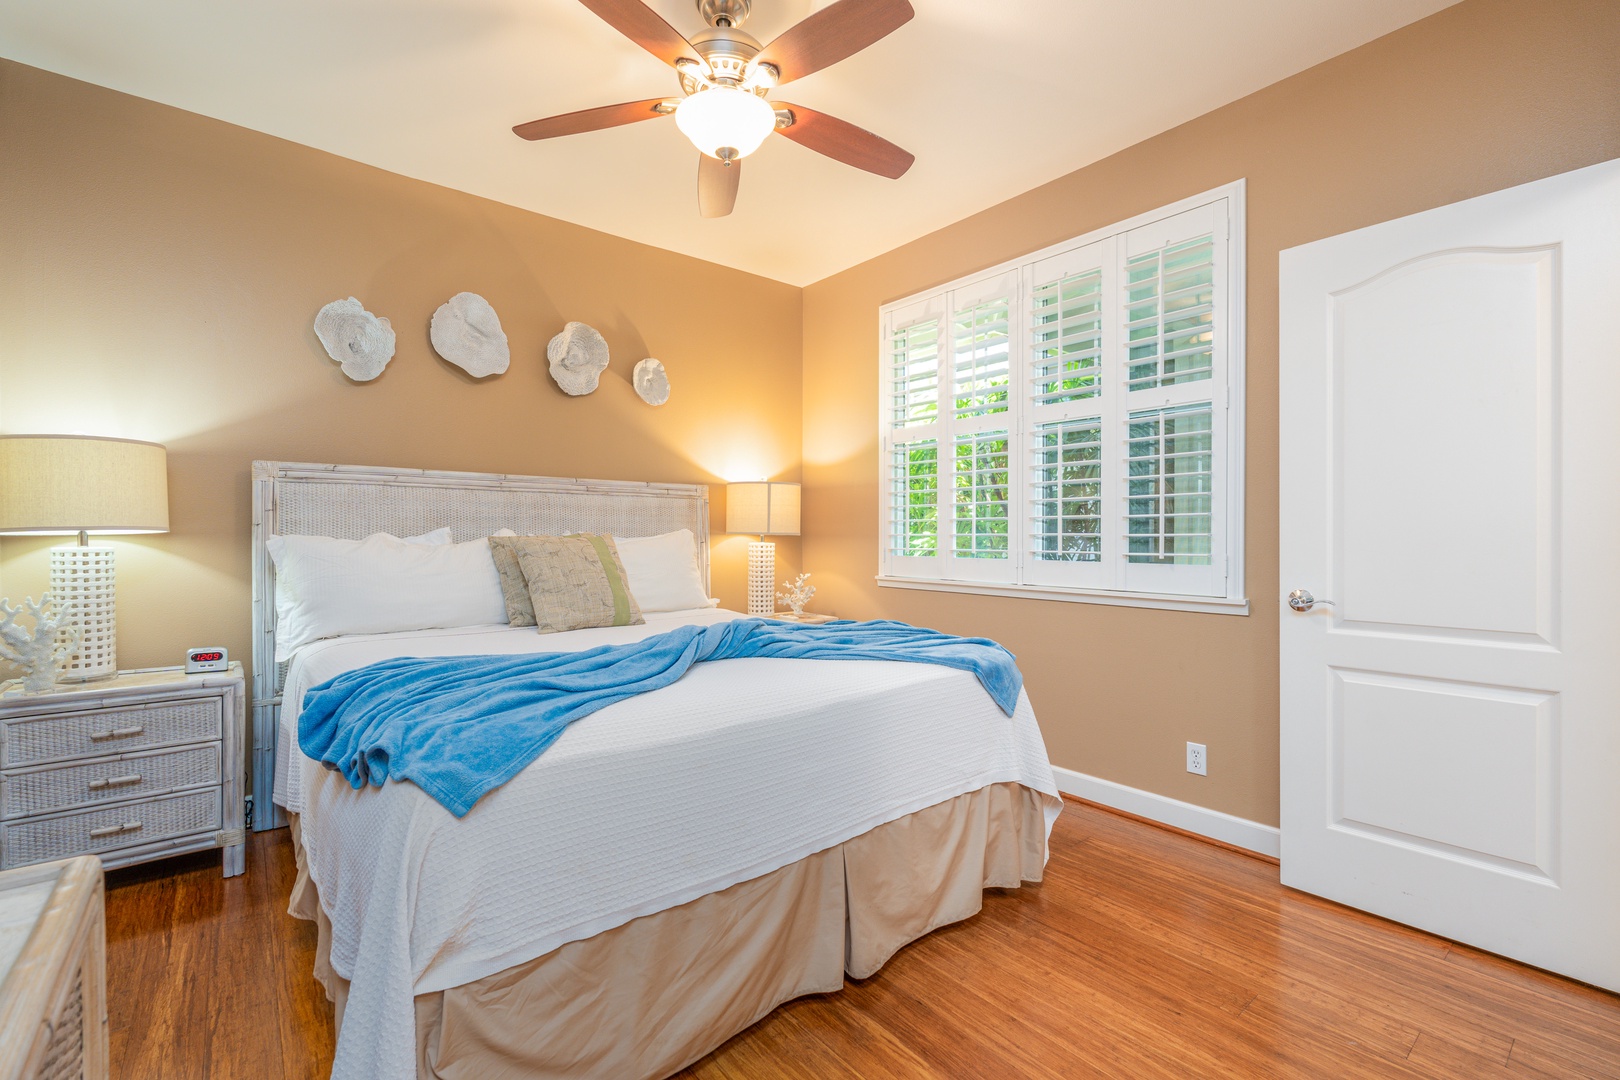 Kapolei Vacation Rentals, Ko Olina Kai 1081C - The downstairs guest bedroom with scenery.